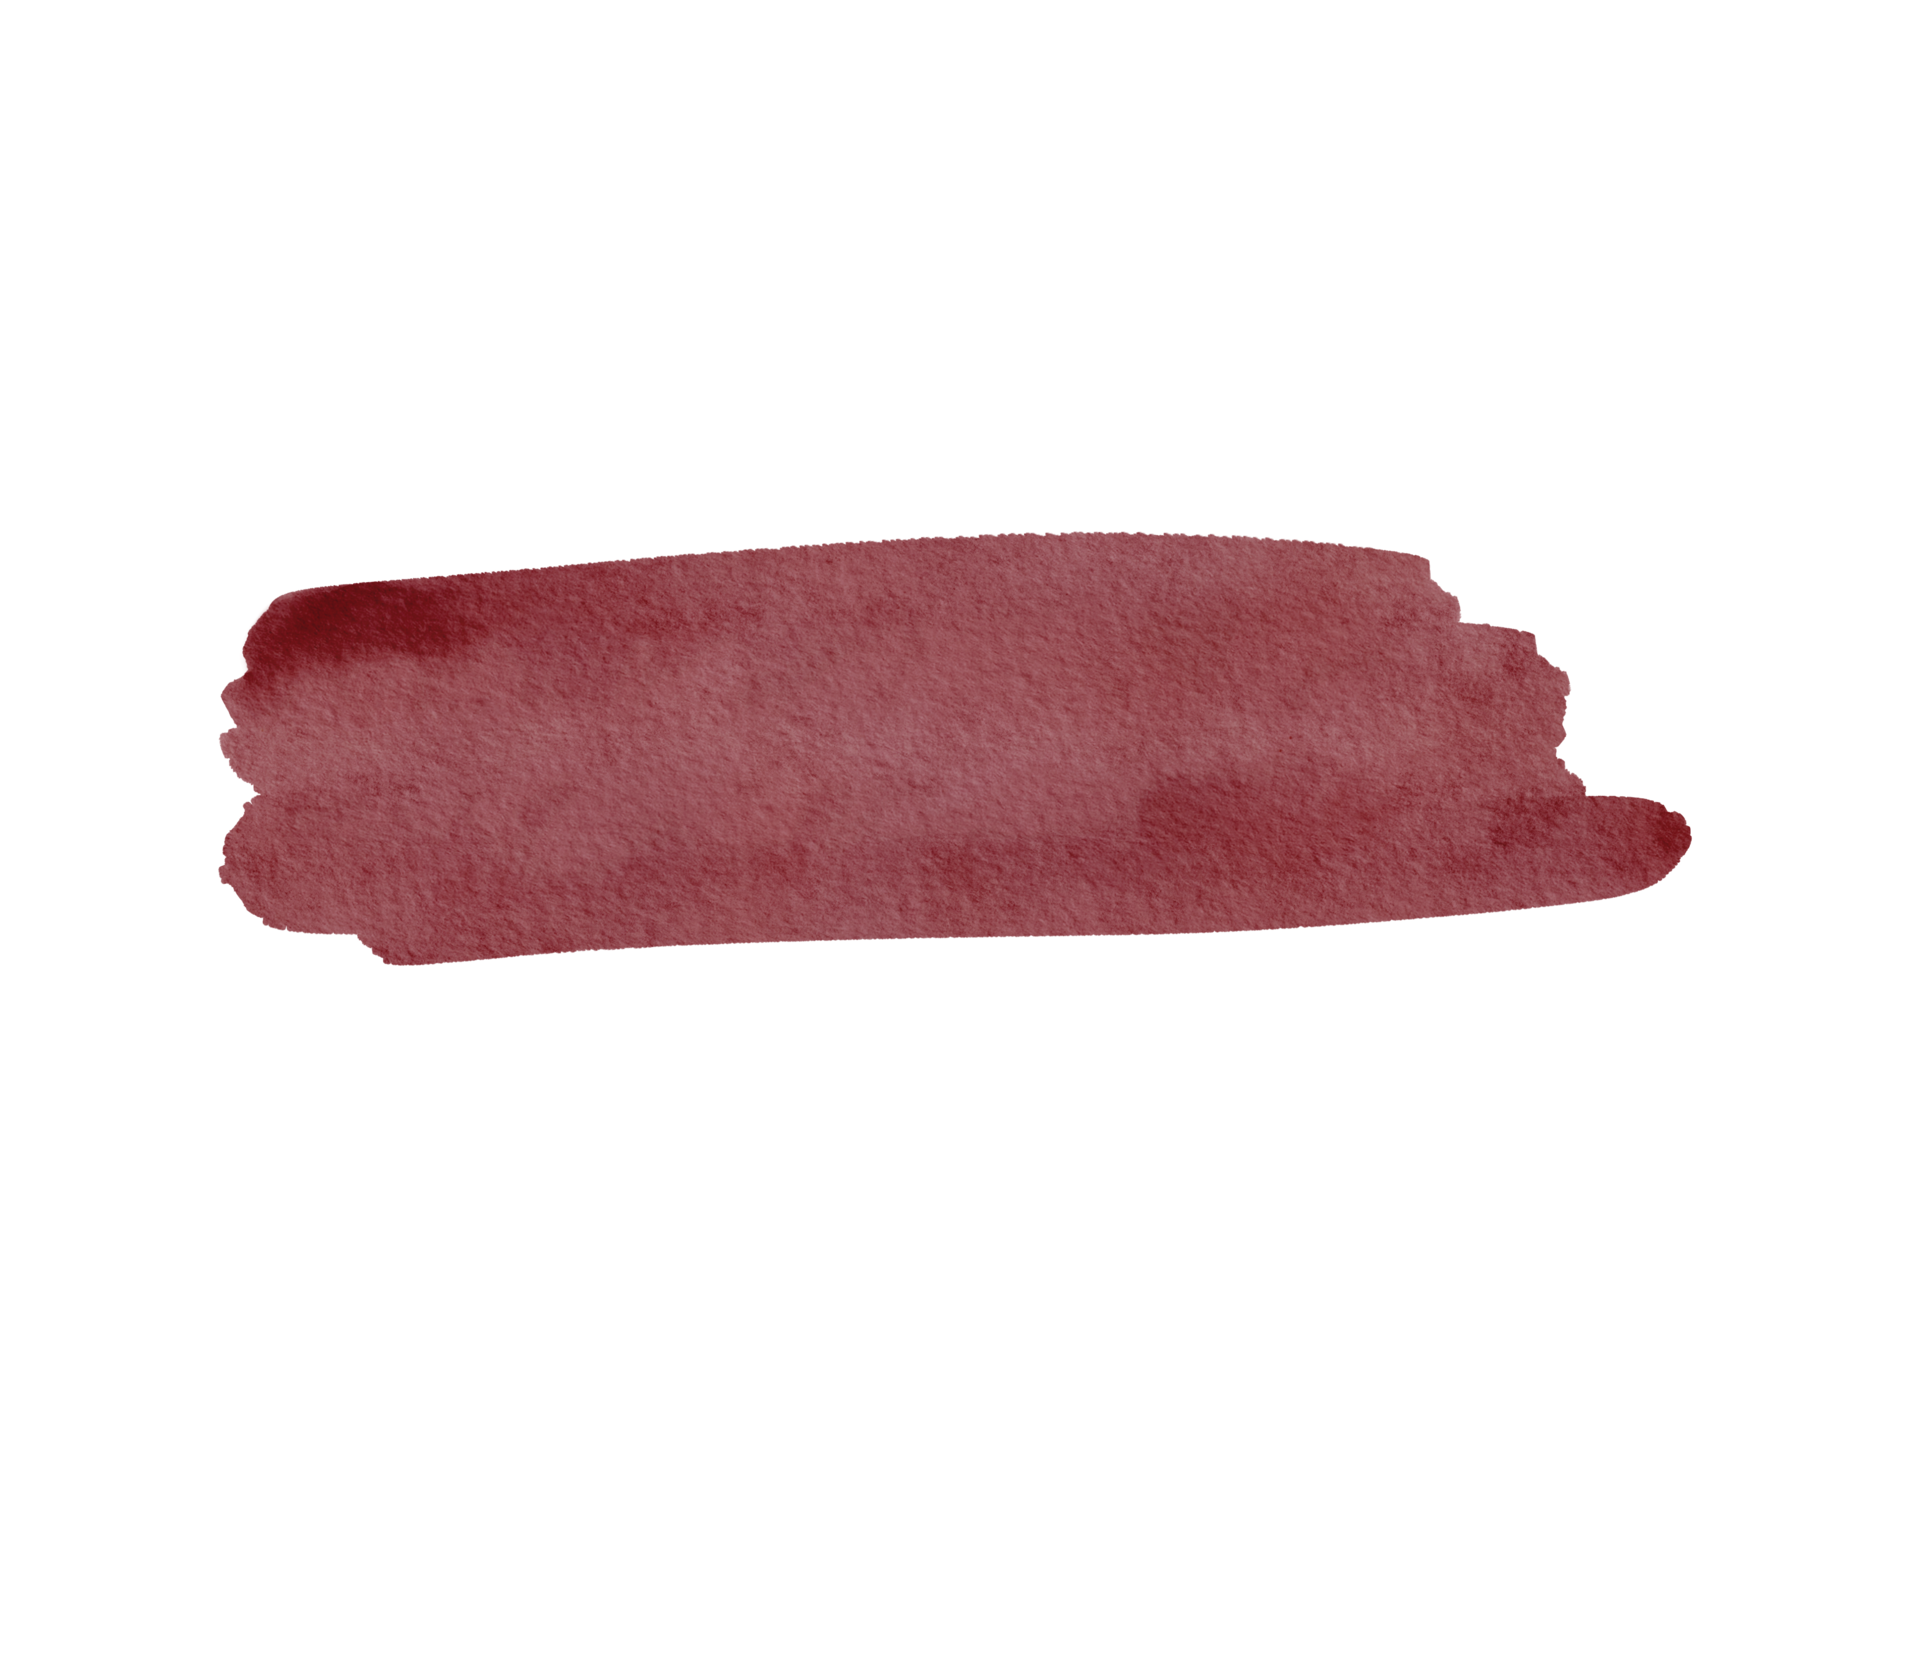 https://static.vecteezy.com/system/resources/previews/017/350/142/original/brown-chocolate-color-paint-brush-strokes-png.png